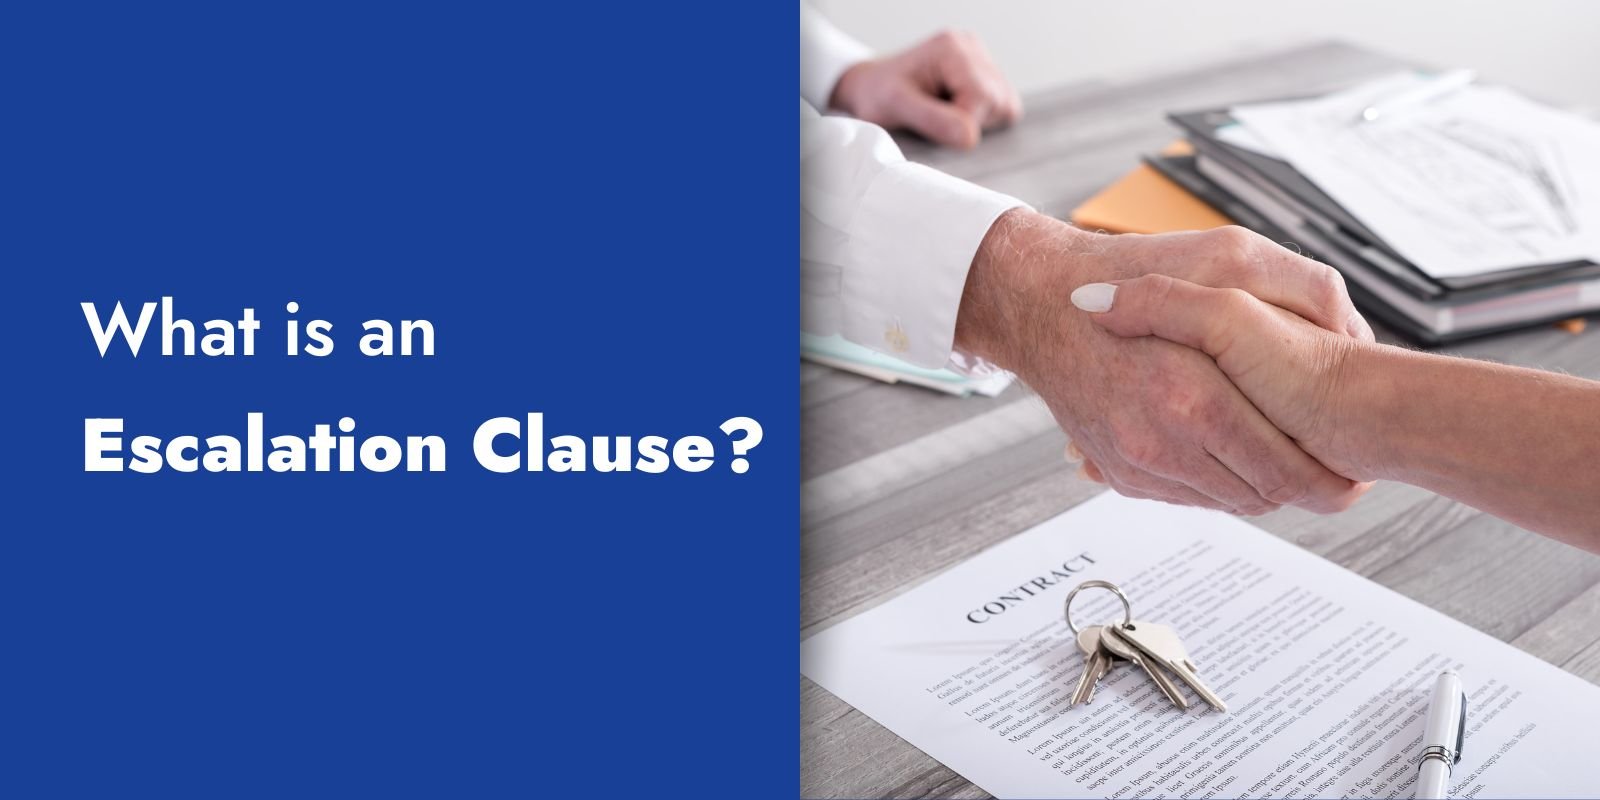 What is an Escalation Clause in Real Estate